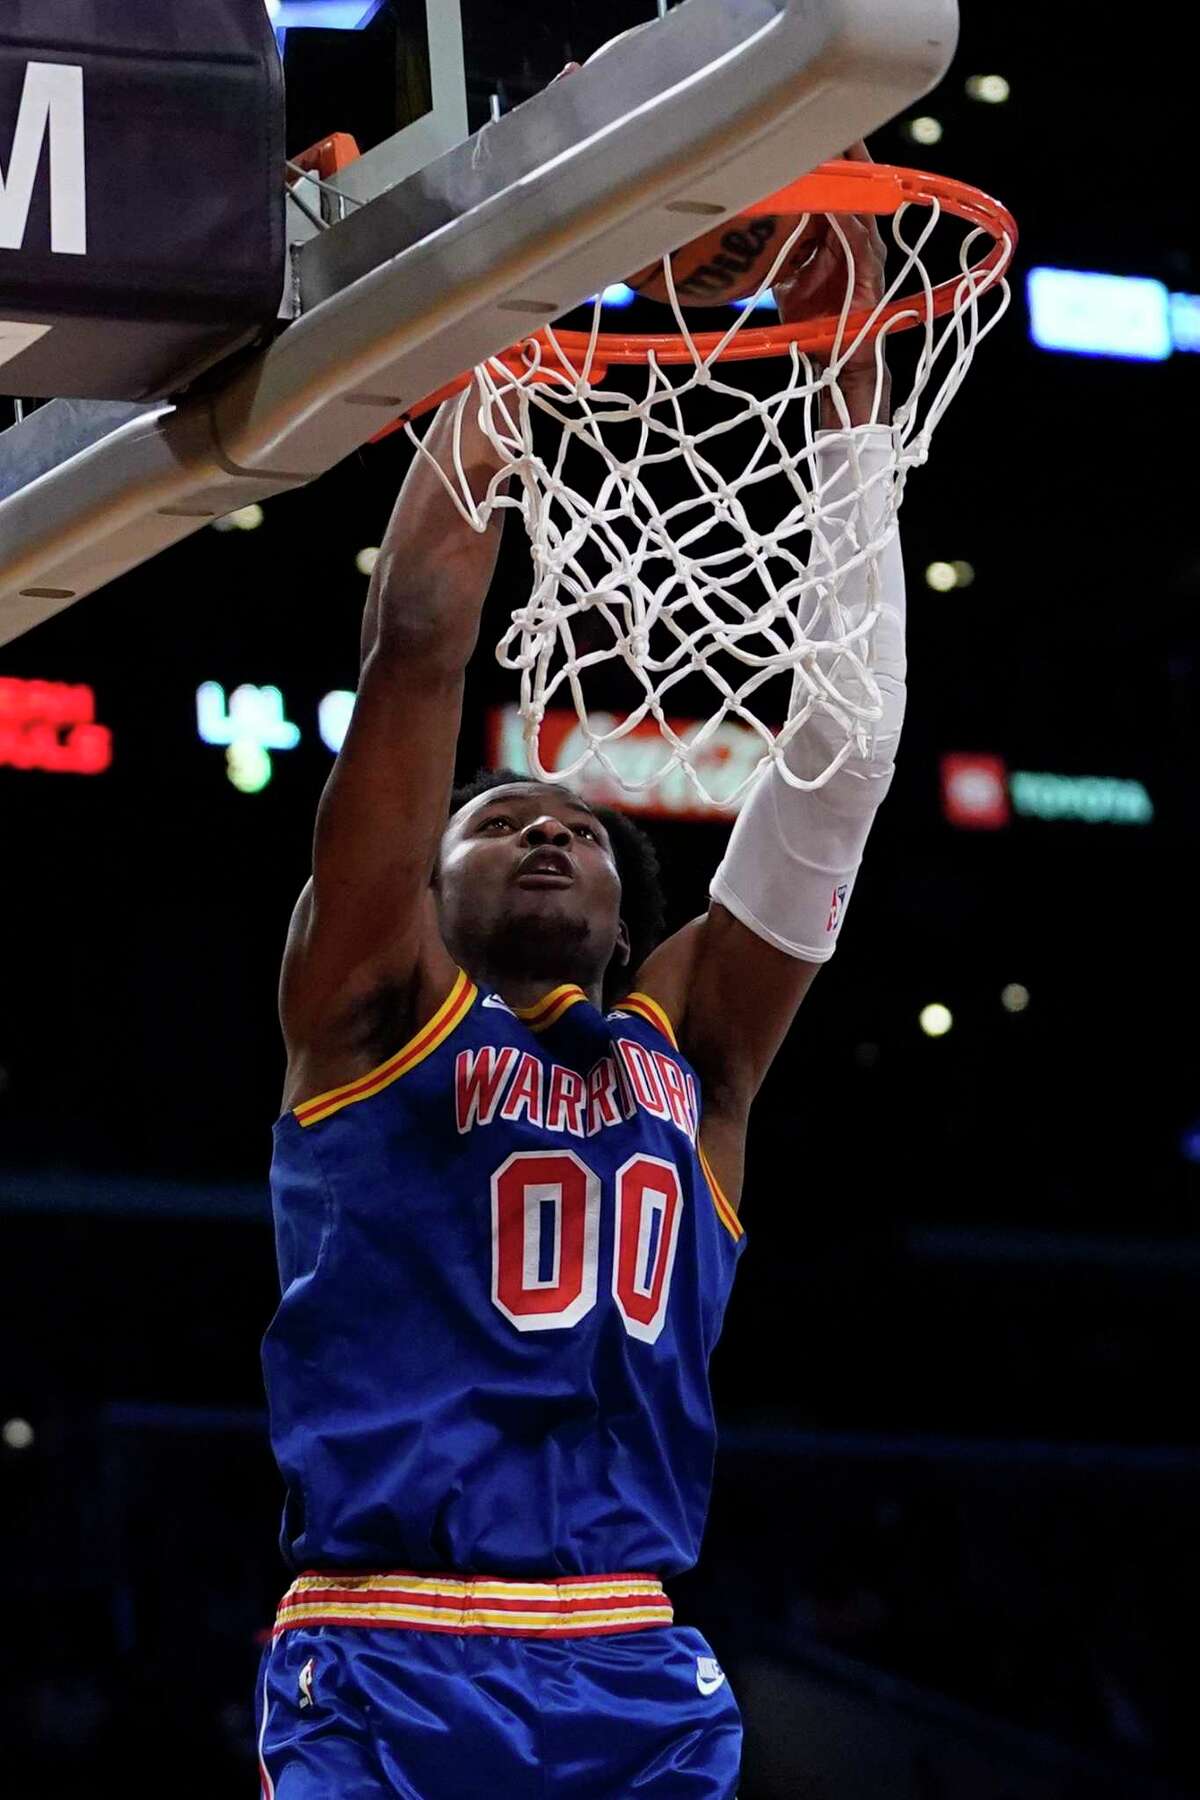 Golden State Warriors forward Jonathan Kuminga (00) dunks during the second half of an NBA basketball game against the Los Angeles Lakers in Los Angeles, Saturday, March 5, 2022. (AP Photo/Ashley Landis)